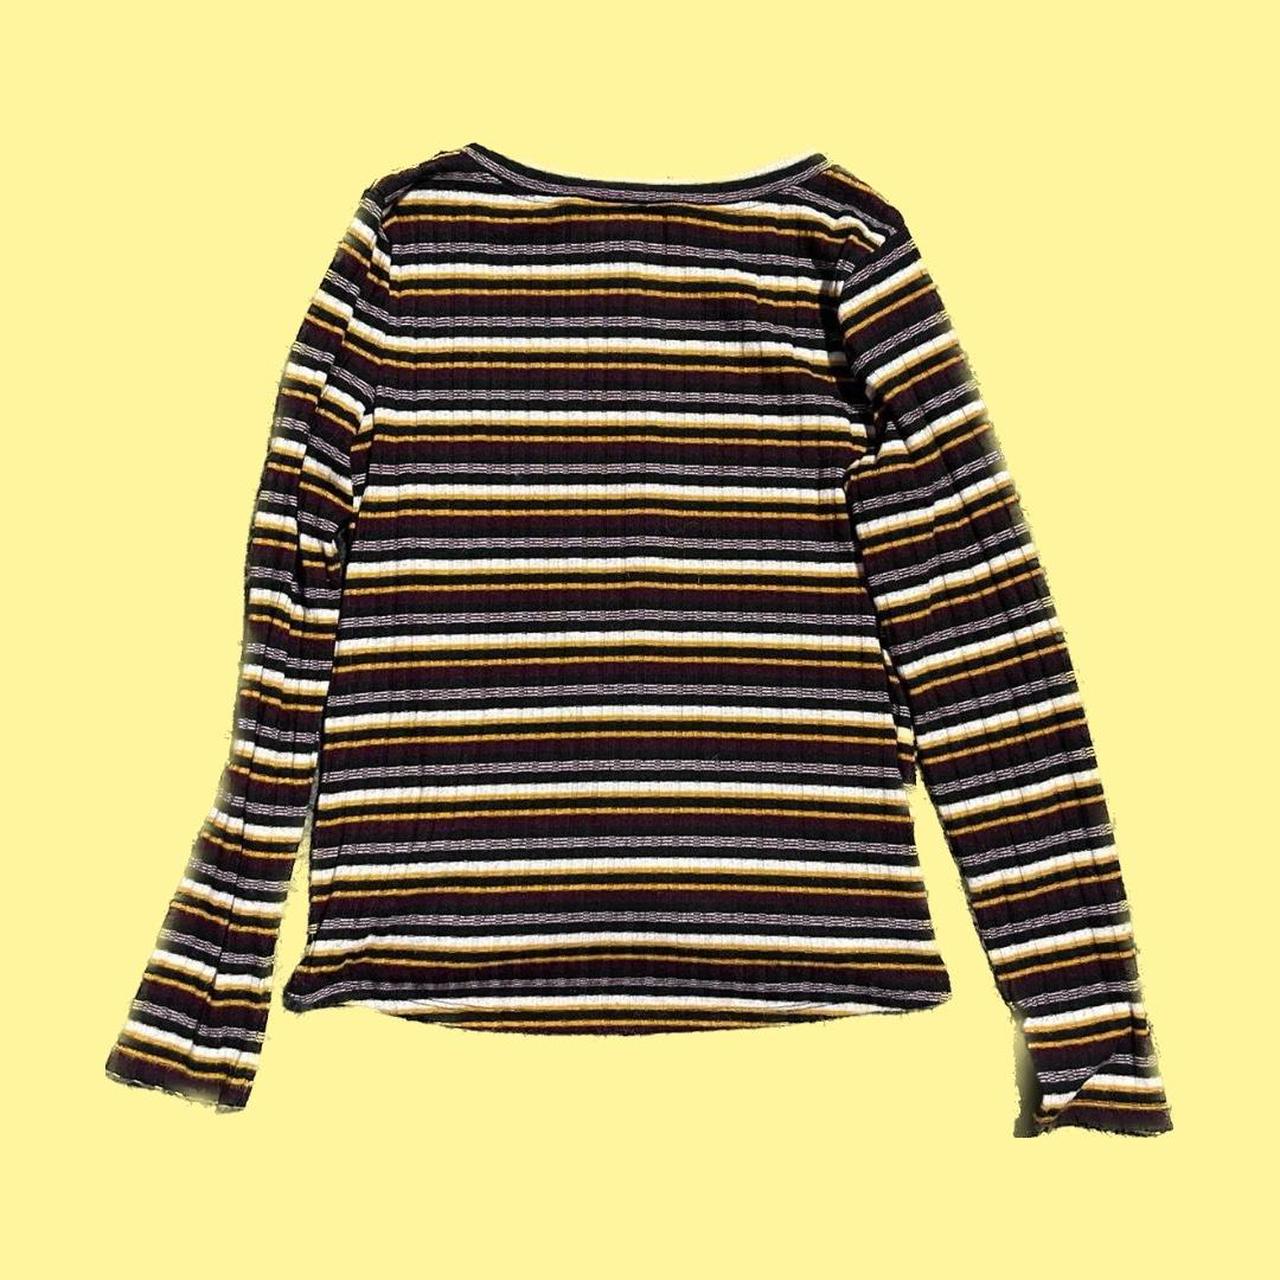 Product Image 3 - MULTI COLOR STRIPED SWEATER
BY BY